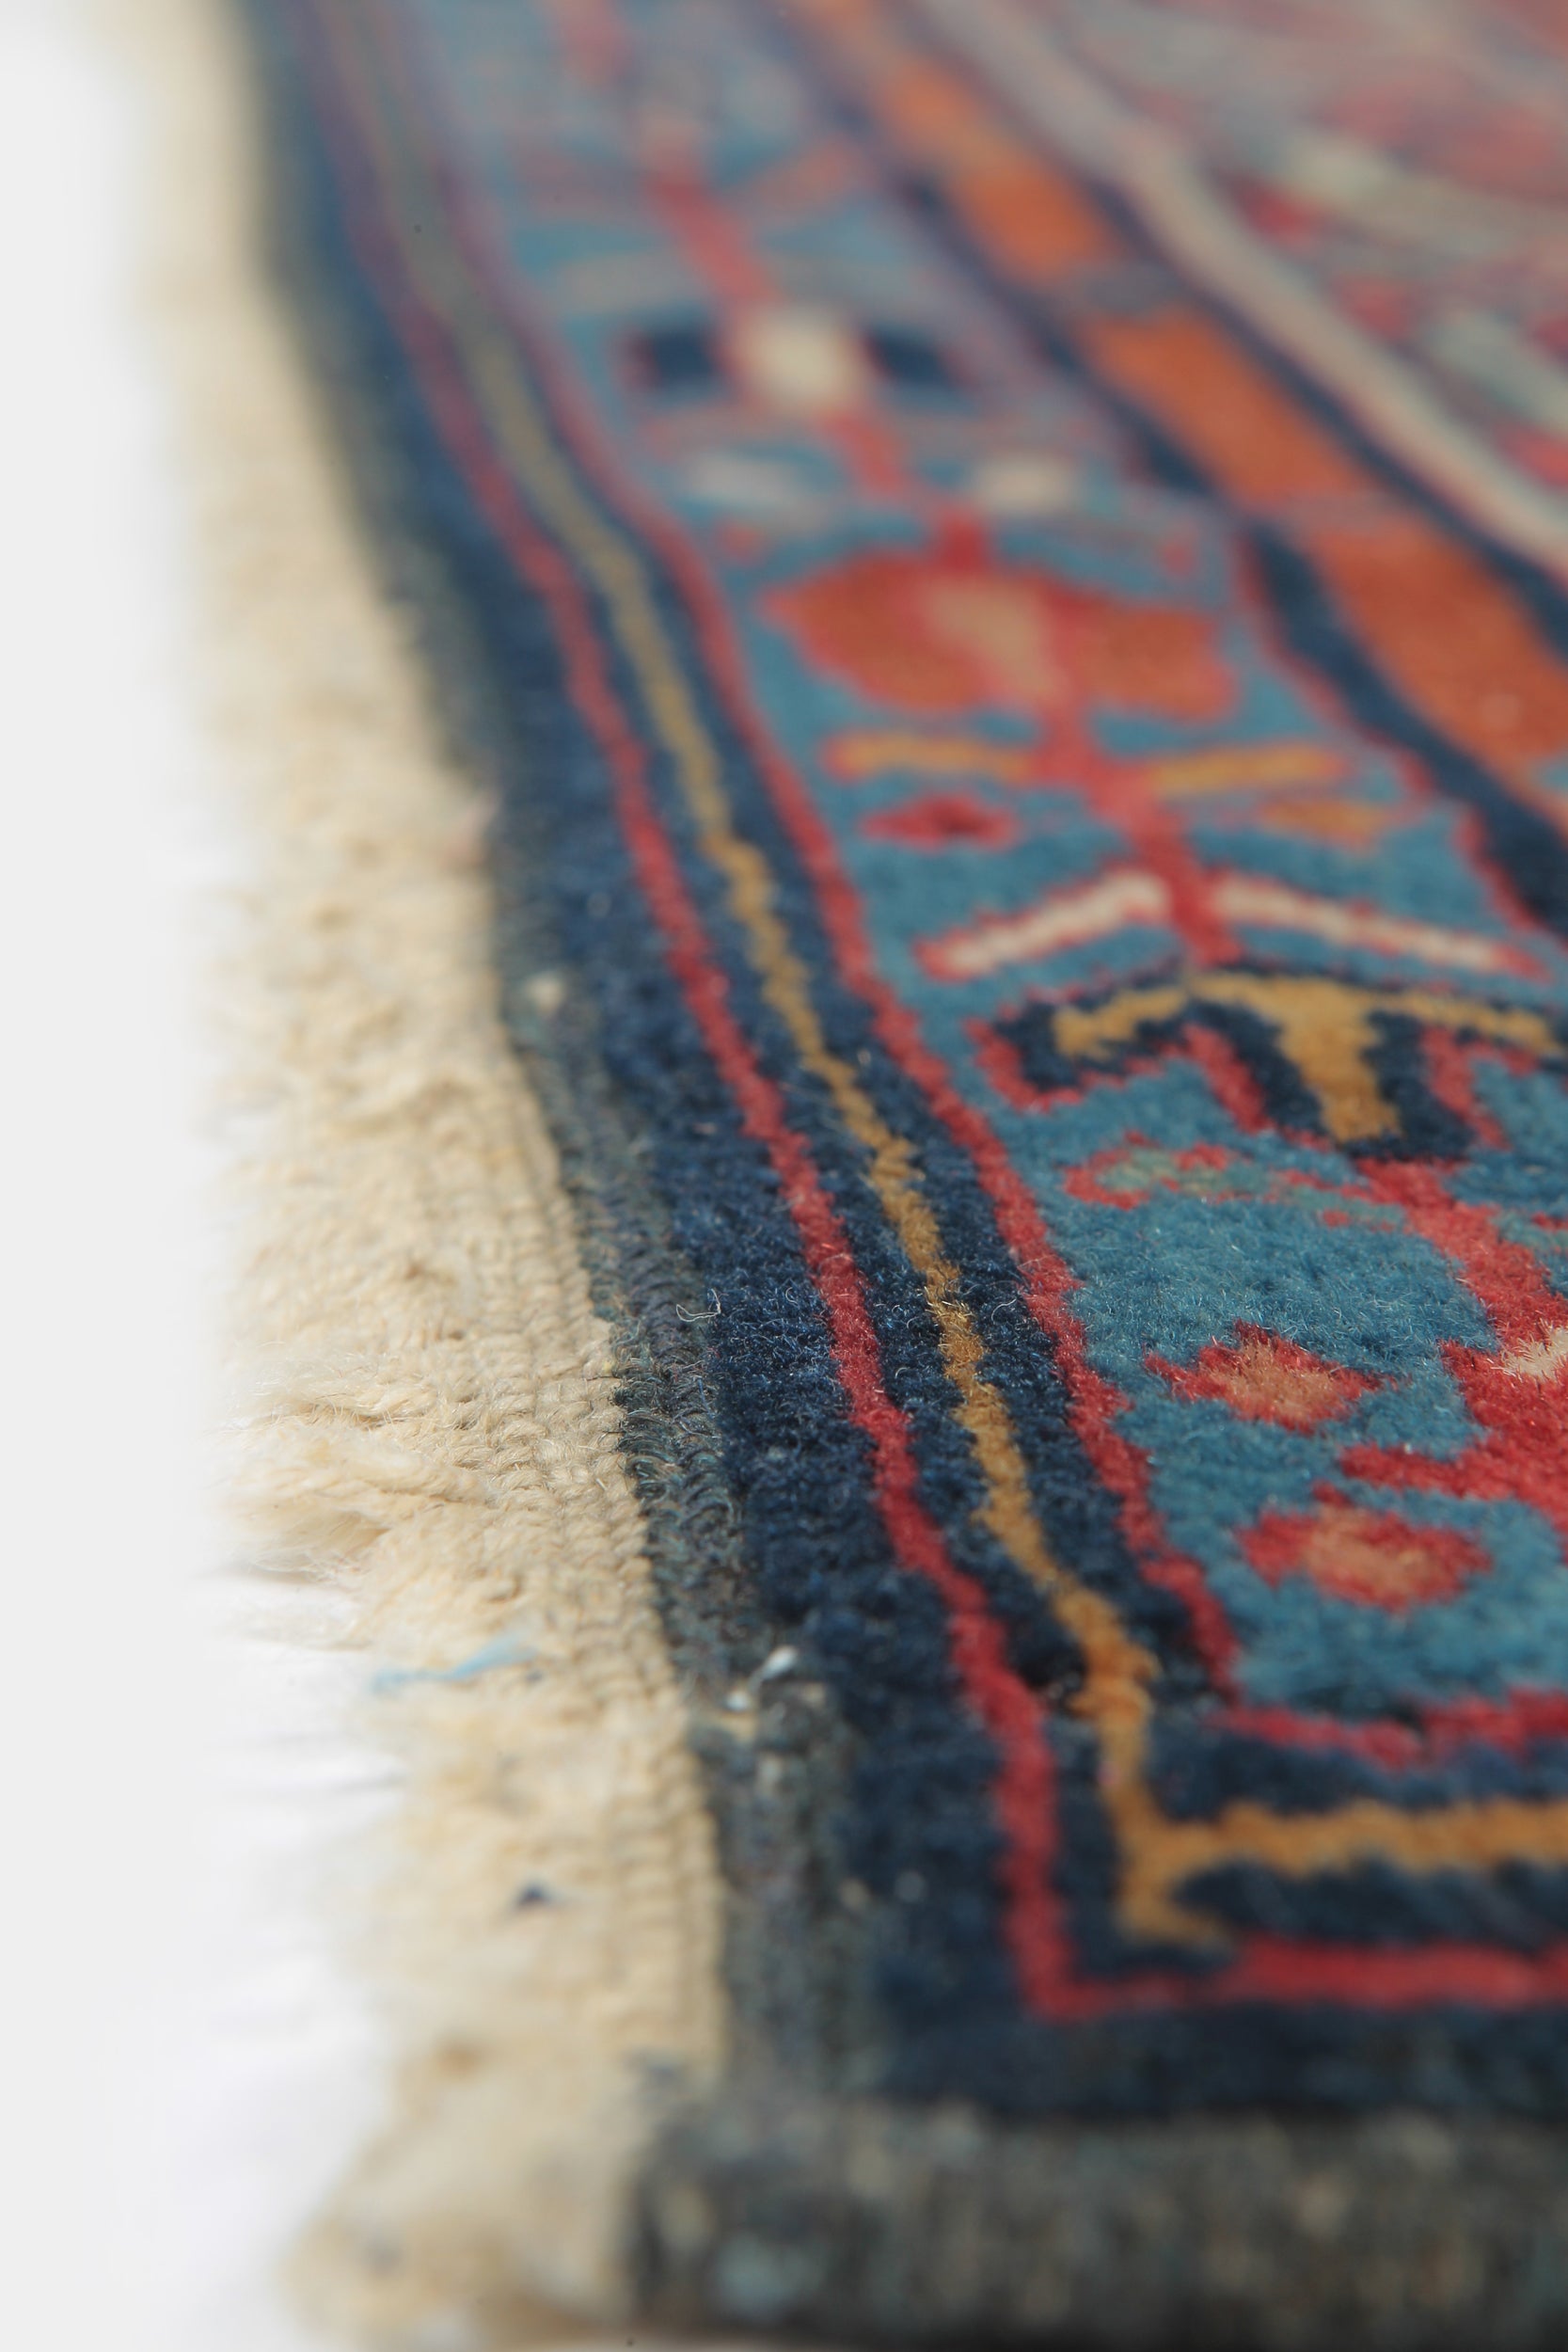 Afshar carpet from South Persia 20er